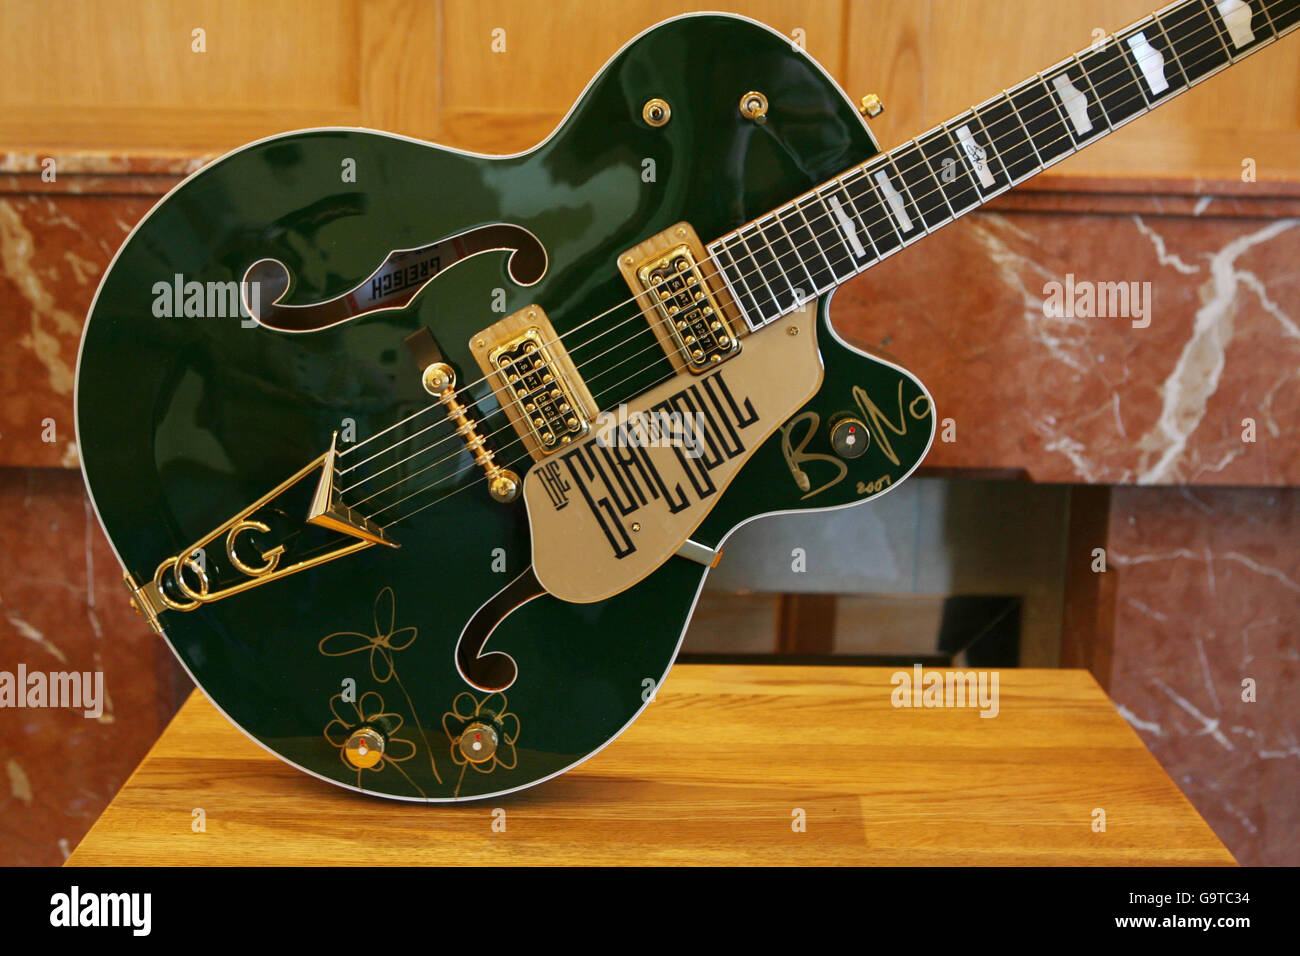 A Bono signed Irish Falcon Gretsch Guitar on display at the Clarence Hotel in Dublin before they are auctioned in New Yok next week in aid of the Music Rising Charity. Stock Photo